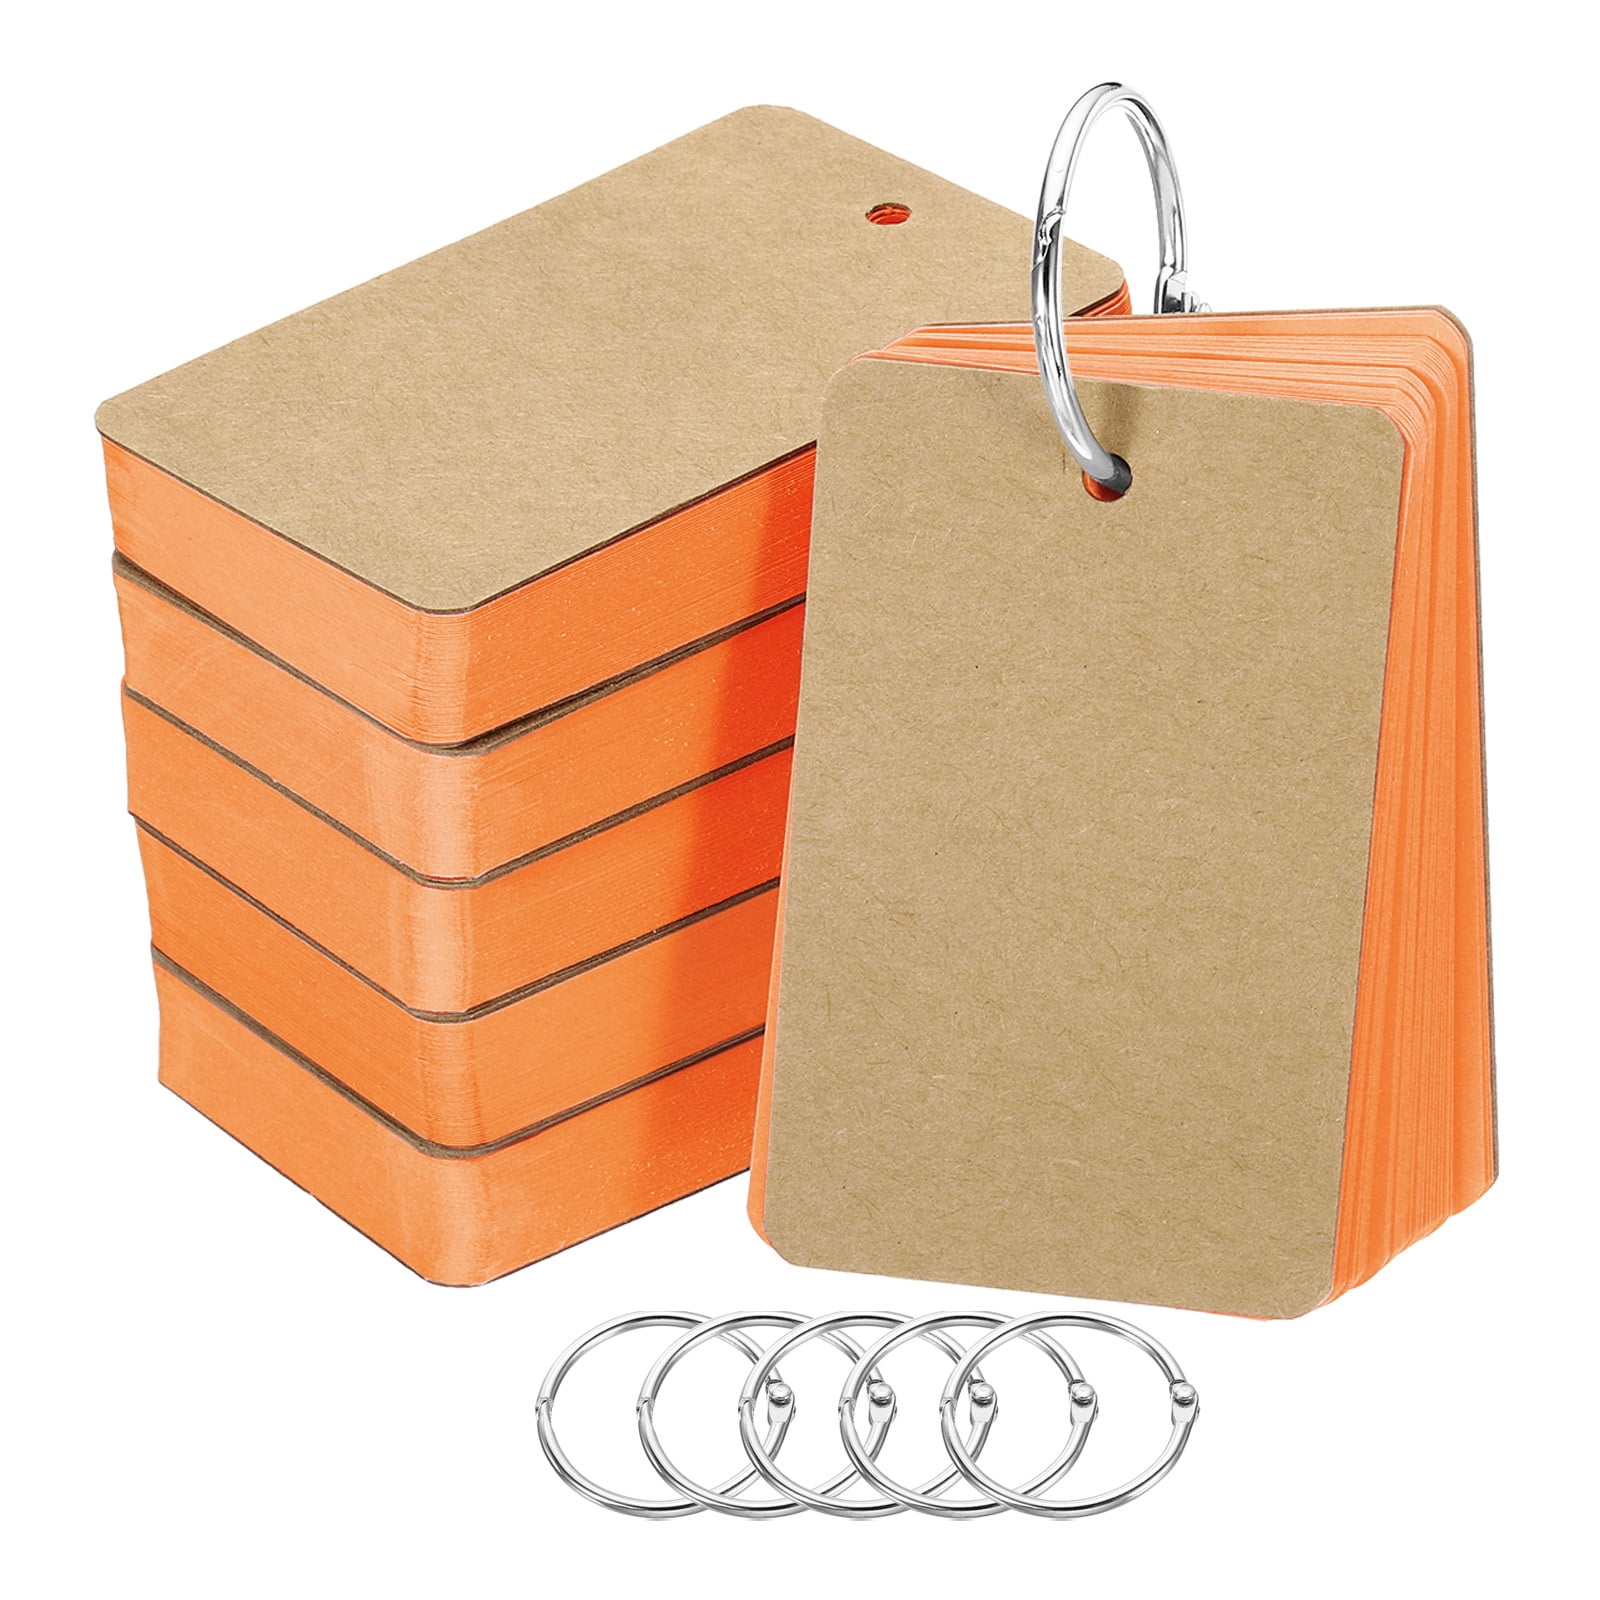 100 Extra Thick Index Cards, Blank Note Card